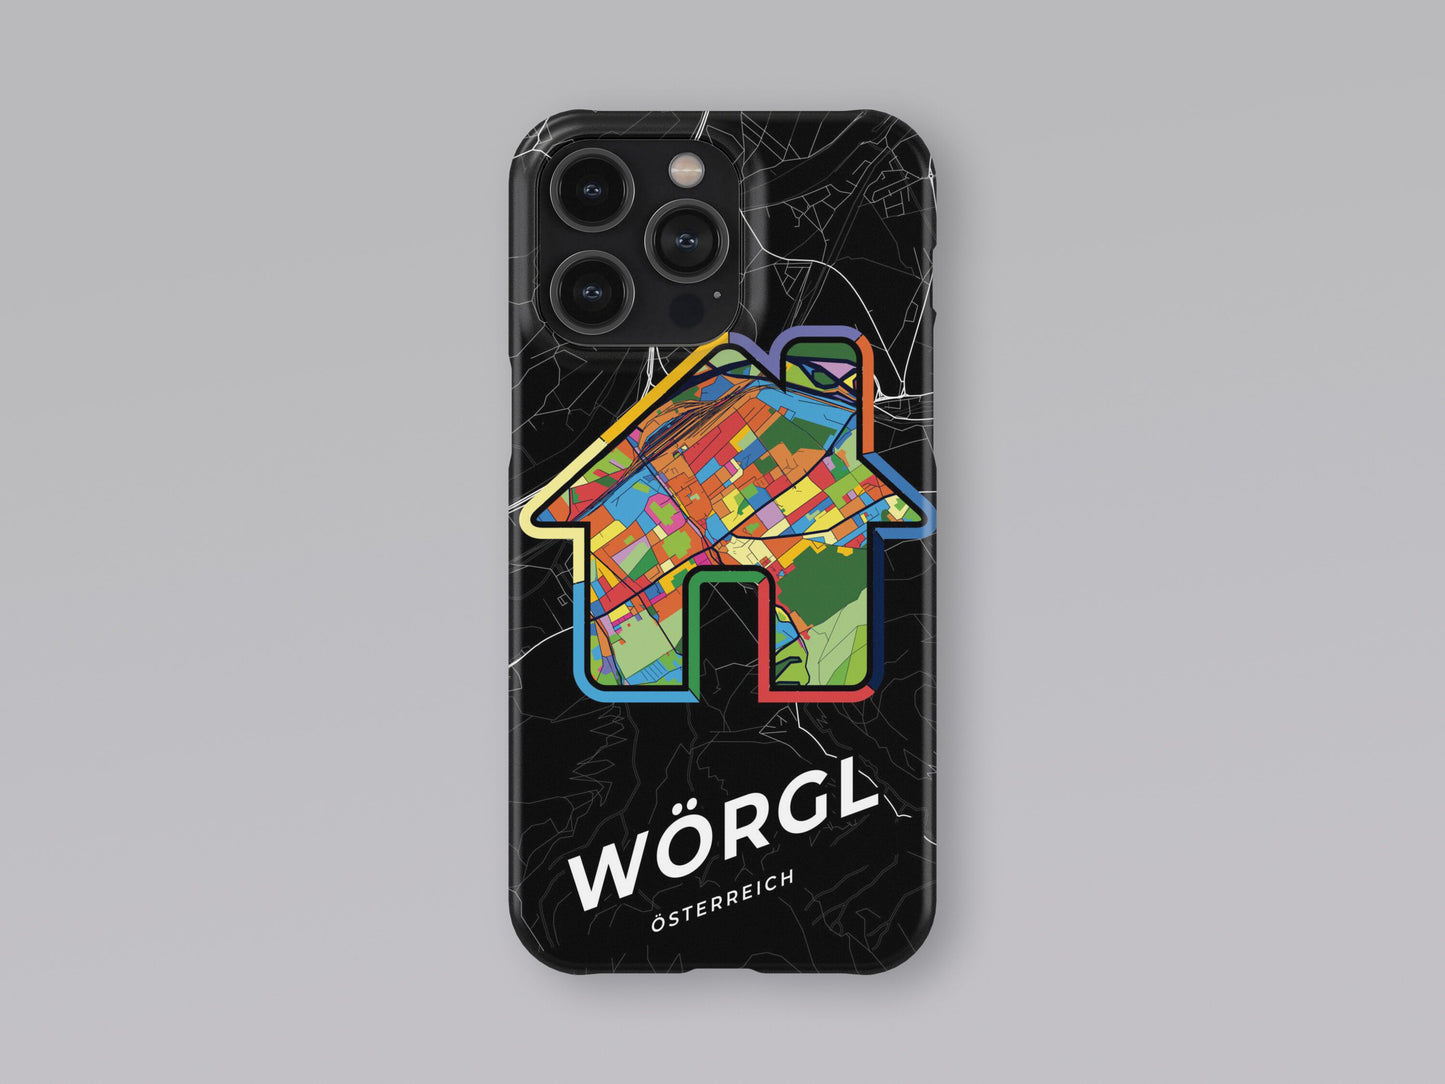 Wörgl Österreich slim phone case with colorful icon 3